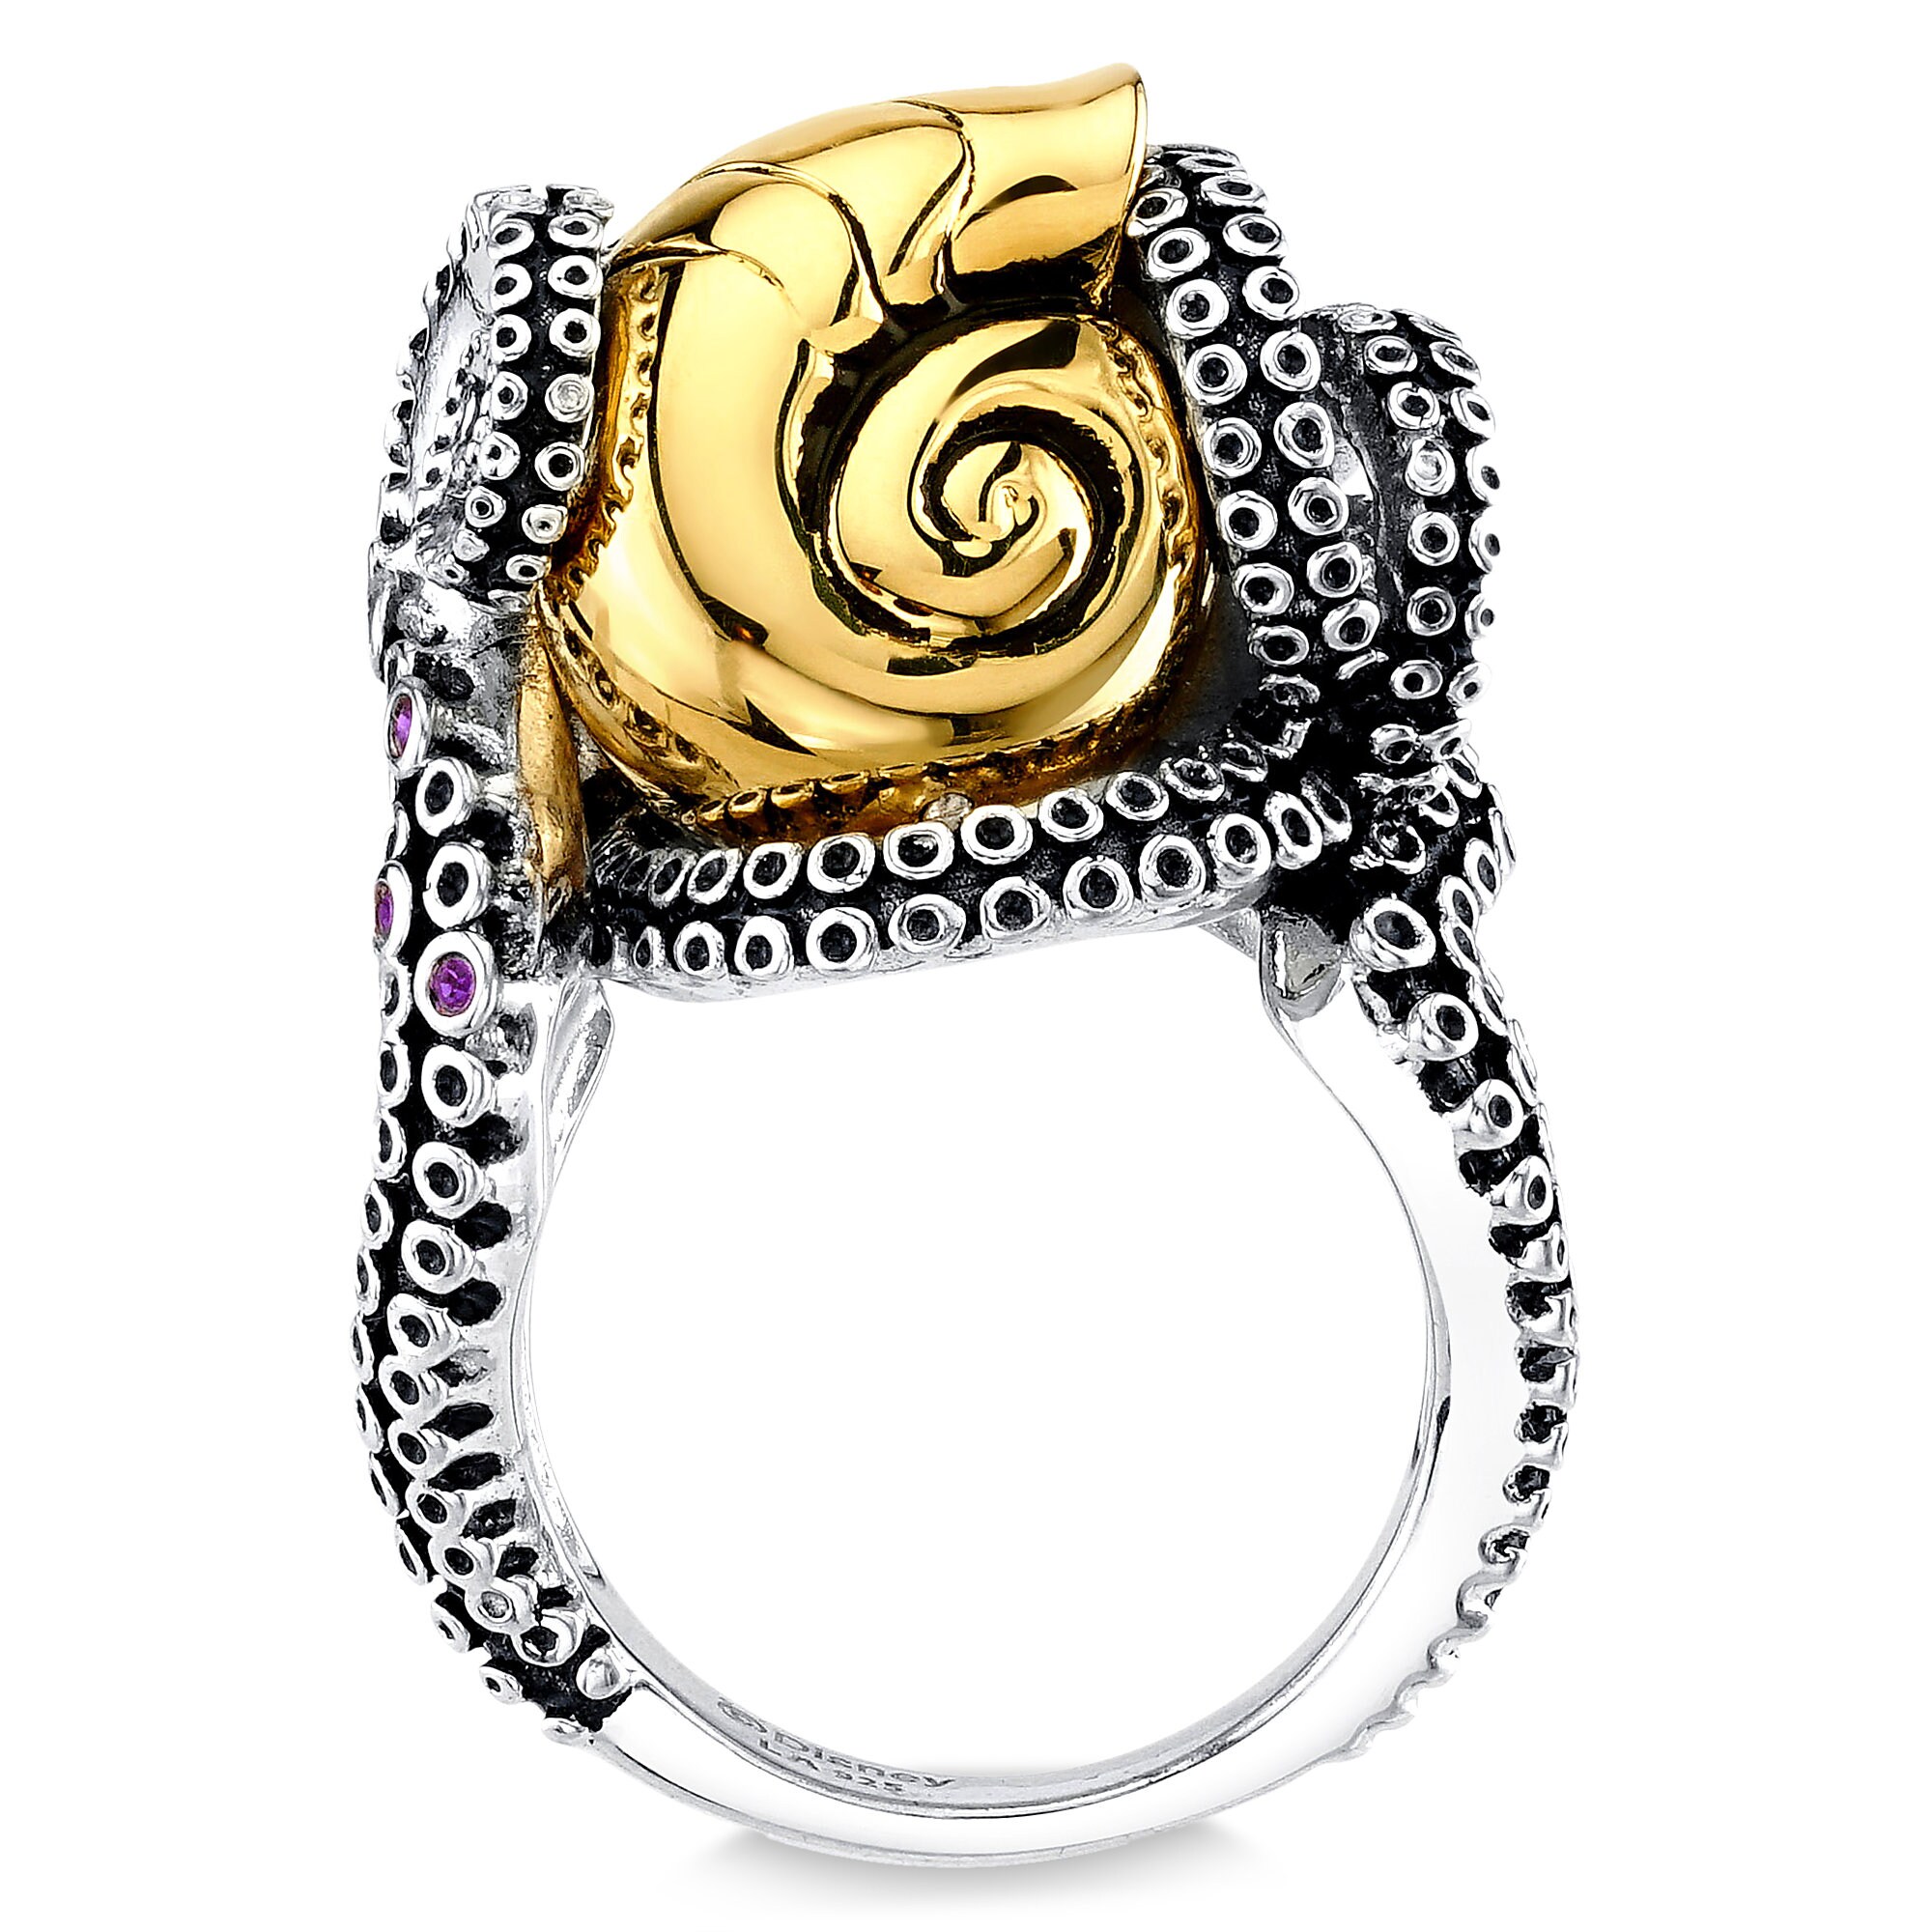 Ursula Tentacle Ring by RockLove - The Little Mermaid